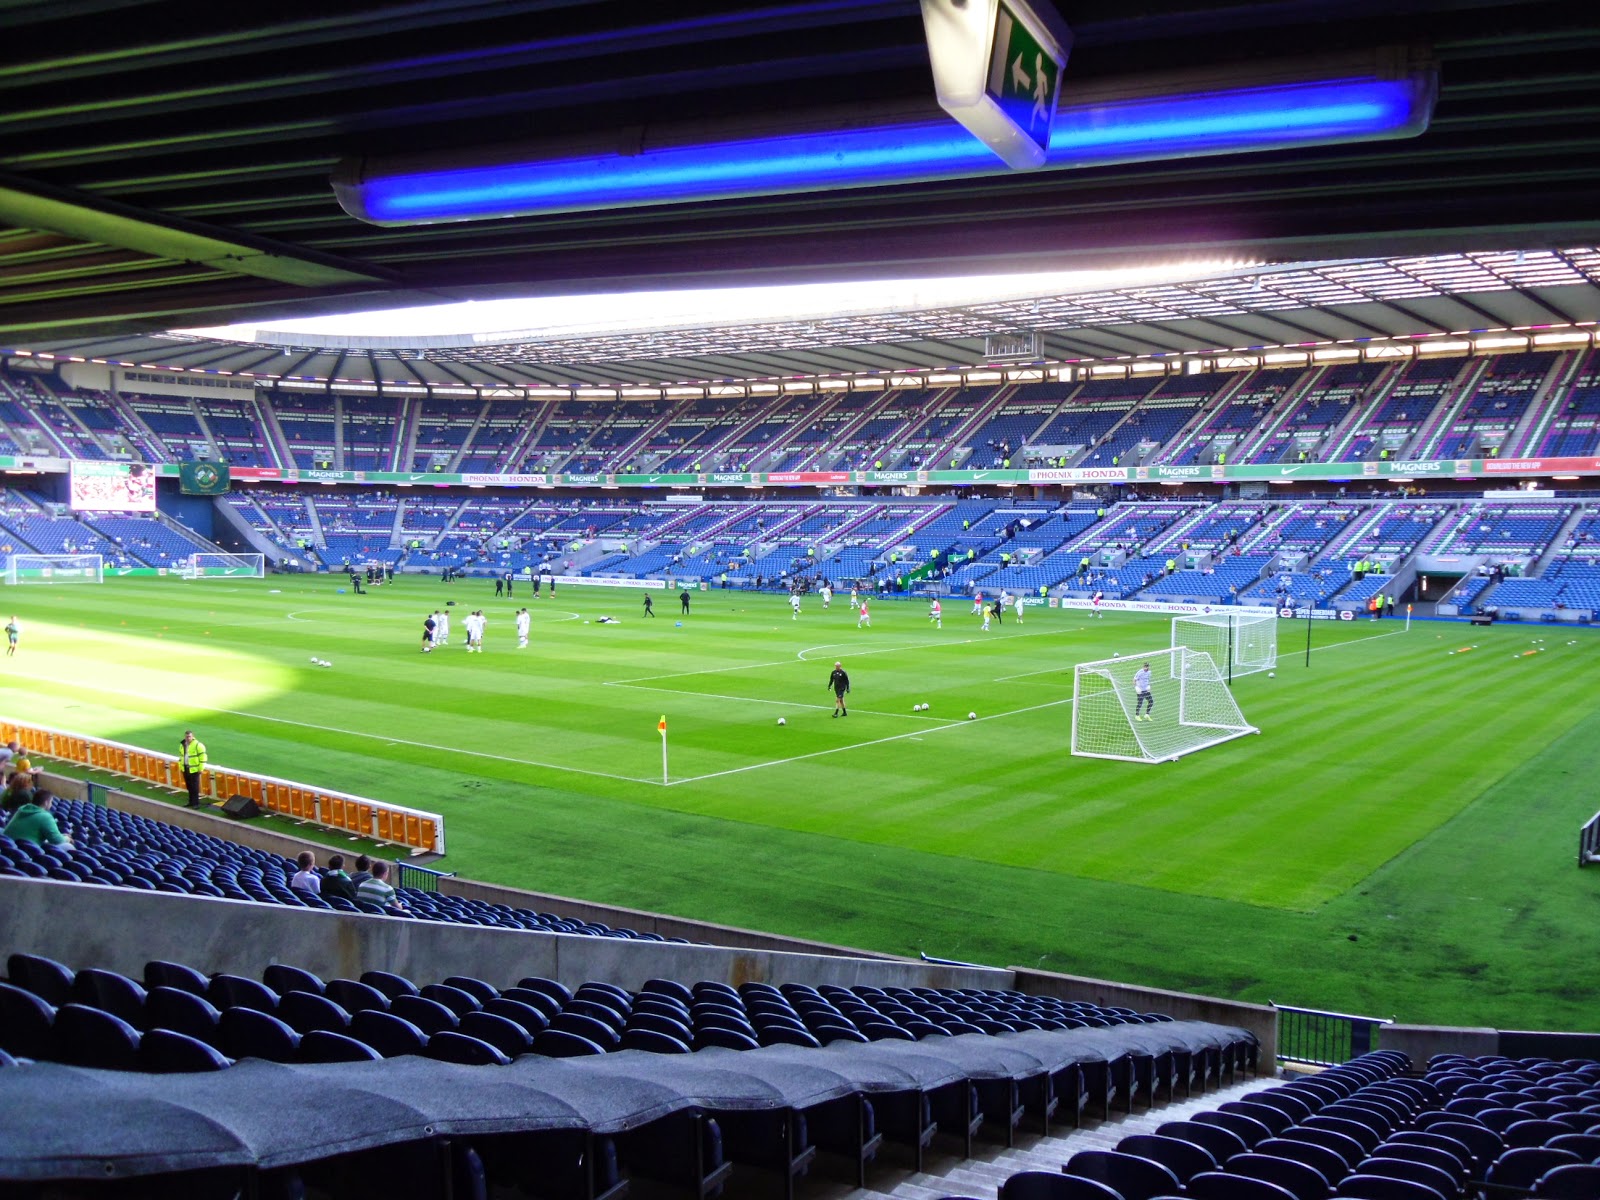 Celtic+%2528at+Murrayfield%2529+%25289%2